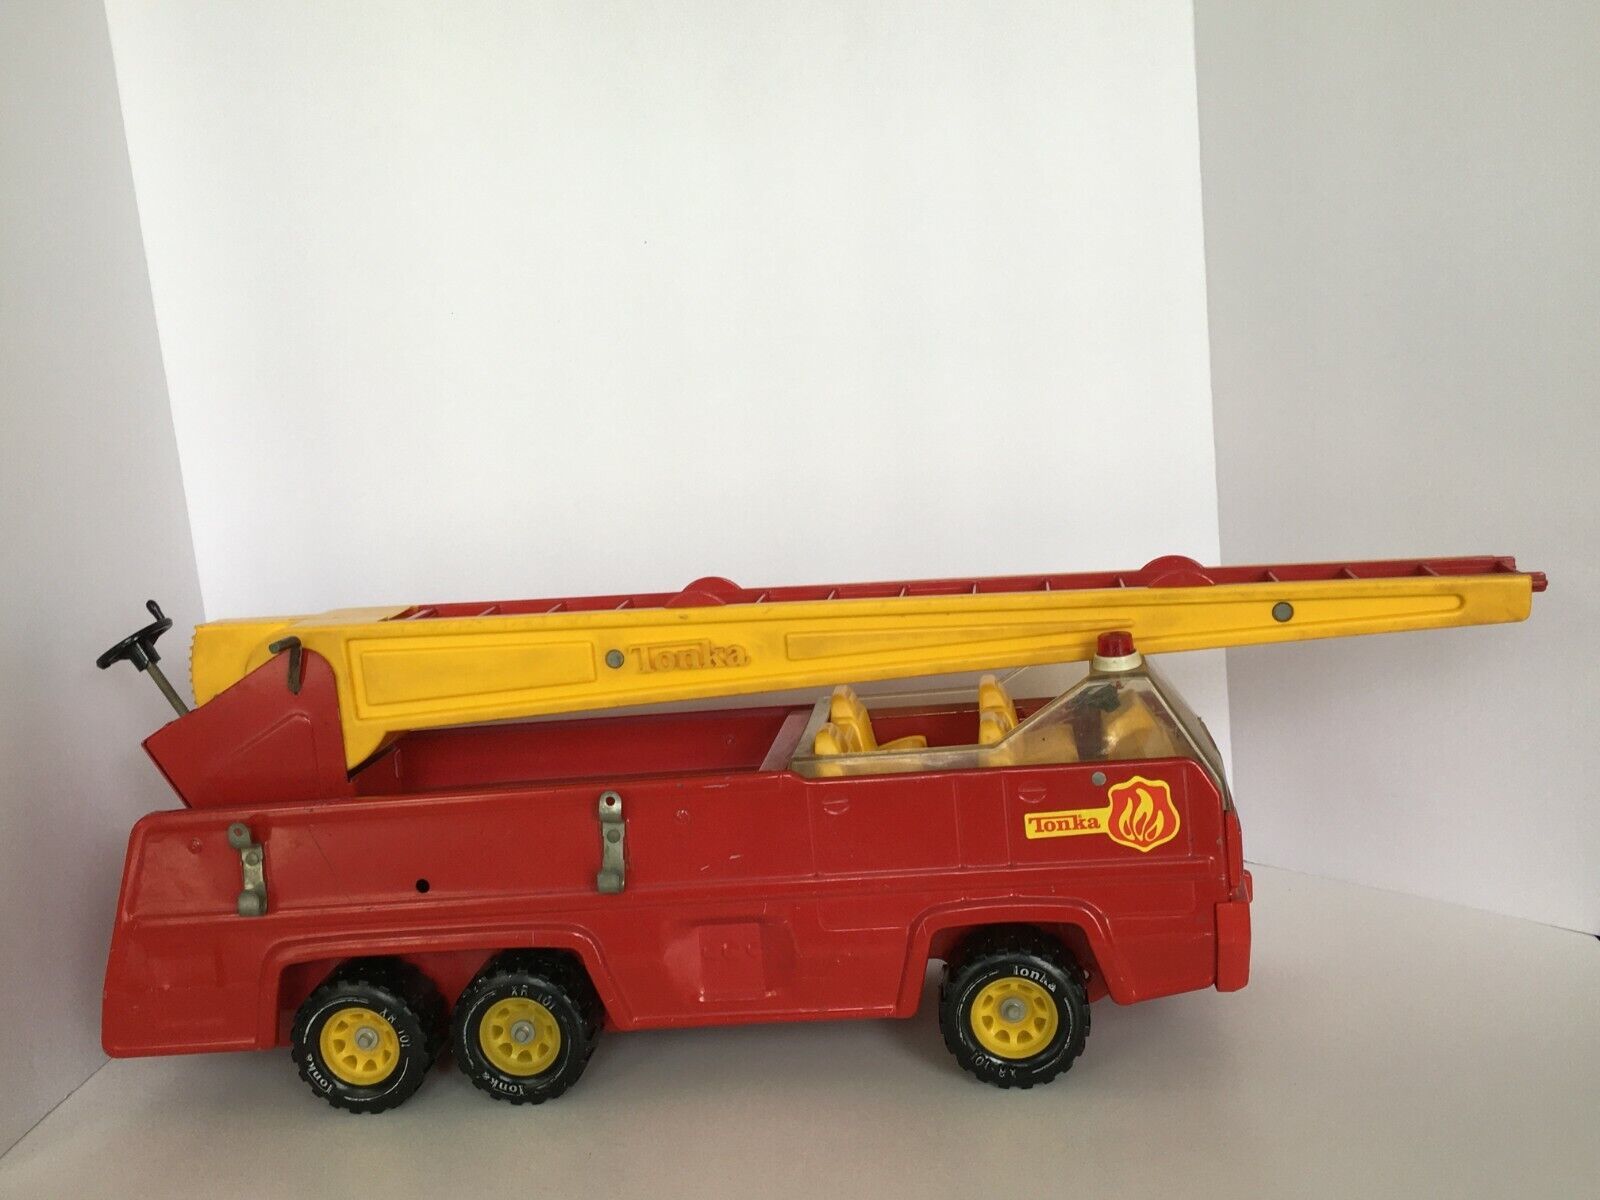 Tonka Metal Toy Fire Truck Vintage Red Long Extendable Ladder 32202 Engine - £39.49 GBP